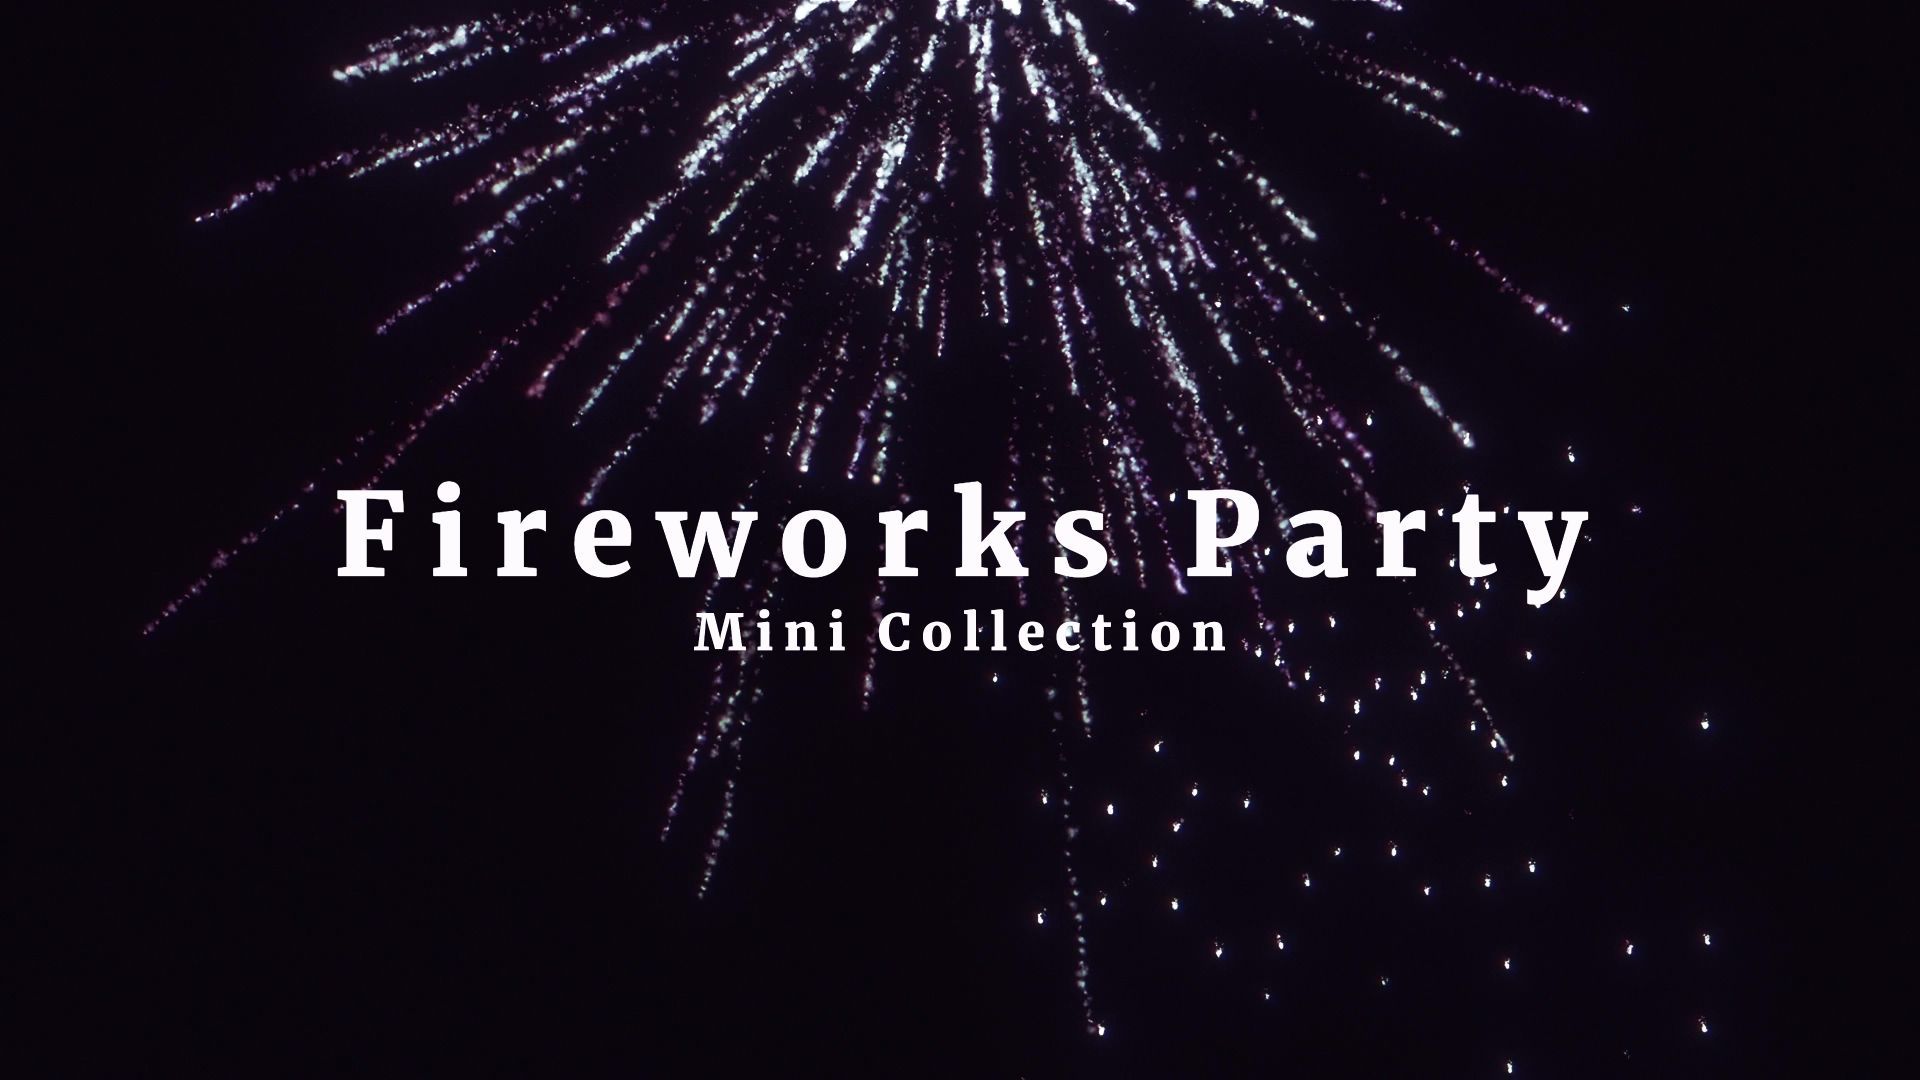 Fireworks Party Mini Collection